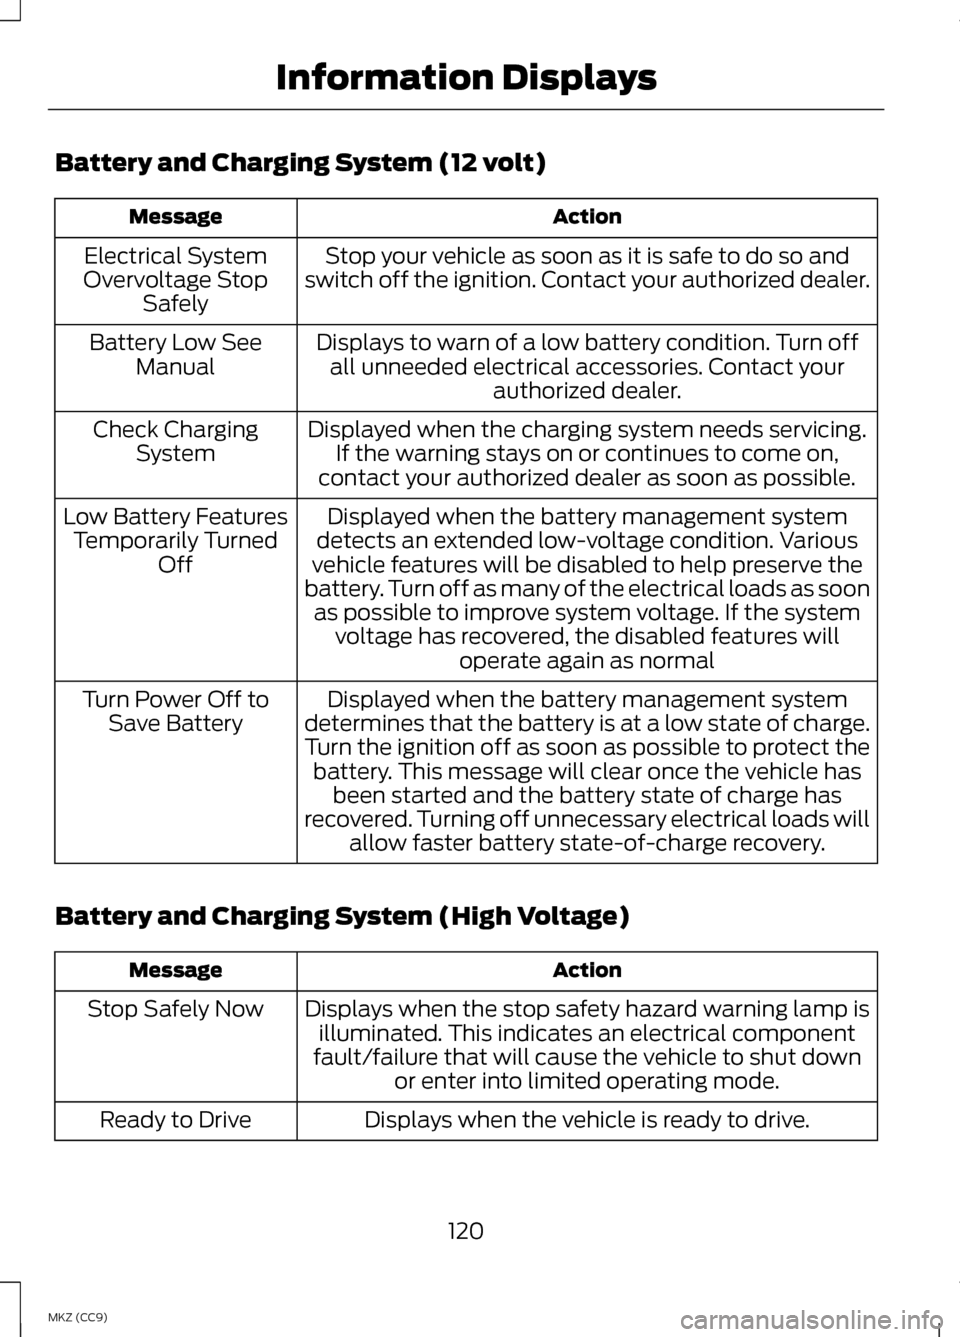 LINCOLN MKZ HYBRID 2013  Owners Manual Battery and Charging System (12 volt)
Action
Message
Stop your vehicle as soon as it is safe to do so and
switch off the ignition. Contact your authorized dealer.
Electrical System
Overvoltage Stop Sa